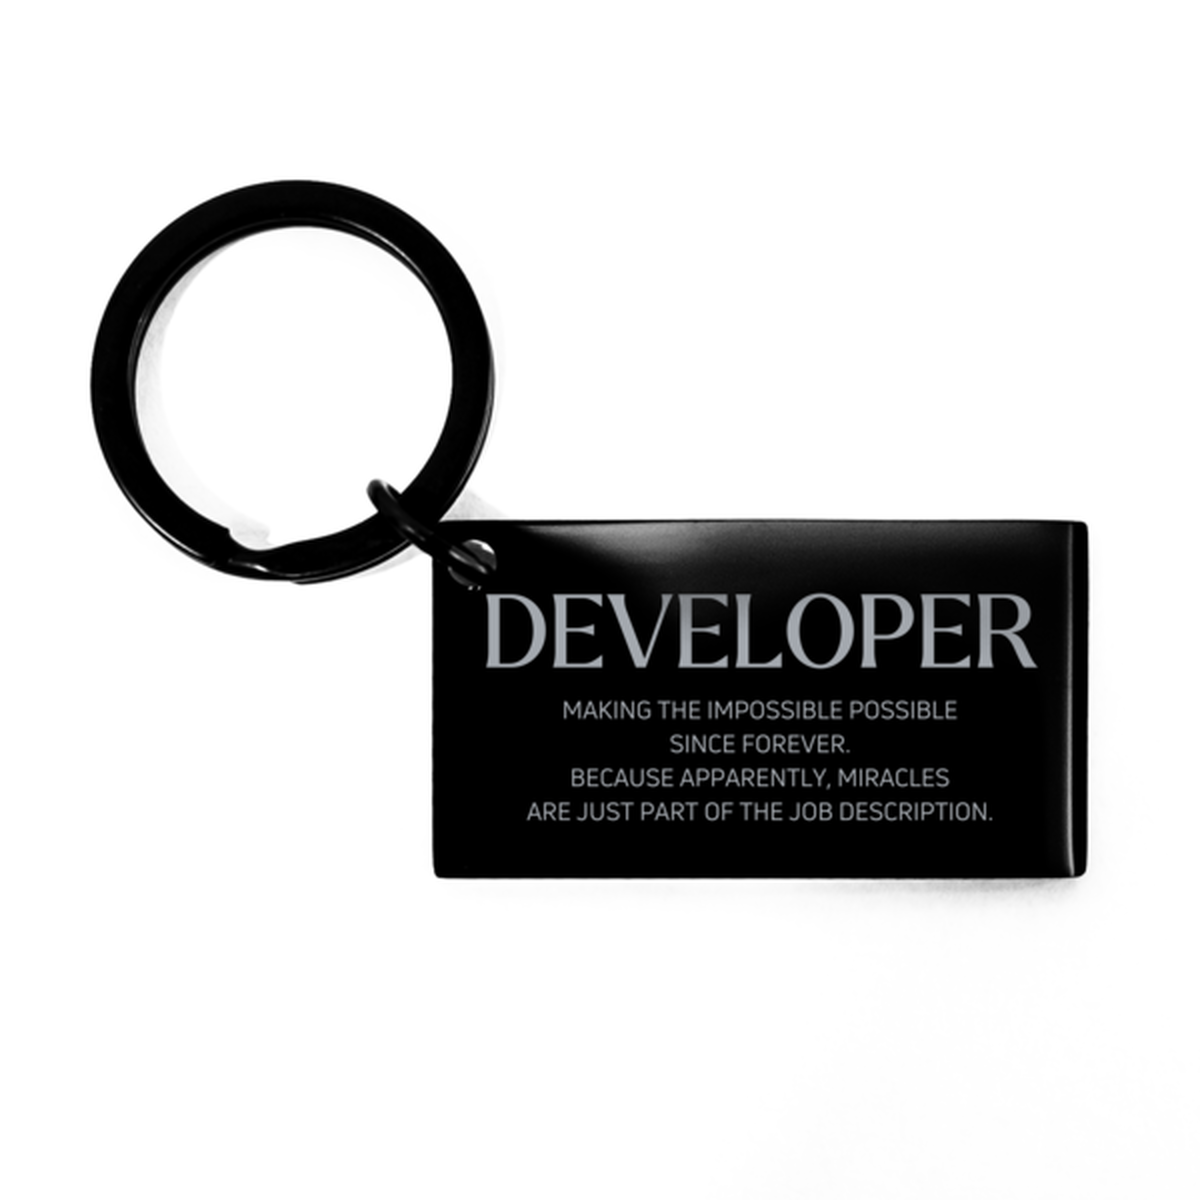 Funny Developer Gifts, Miracles are just part of the job description, Inspirational Birthday Keychain For Developer, Men, Women, Coworkers, Friends, Boss